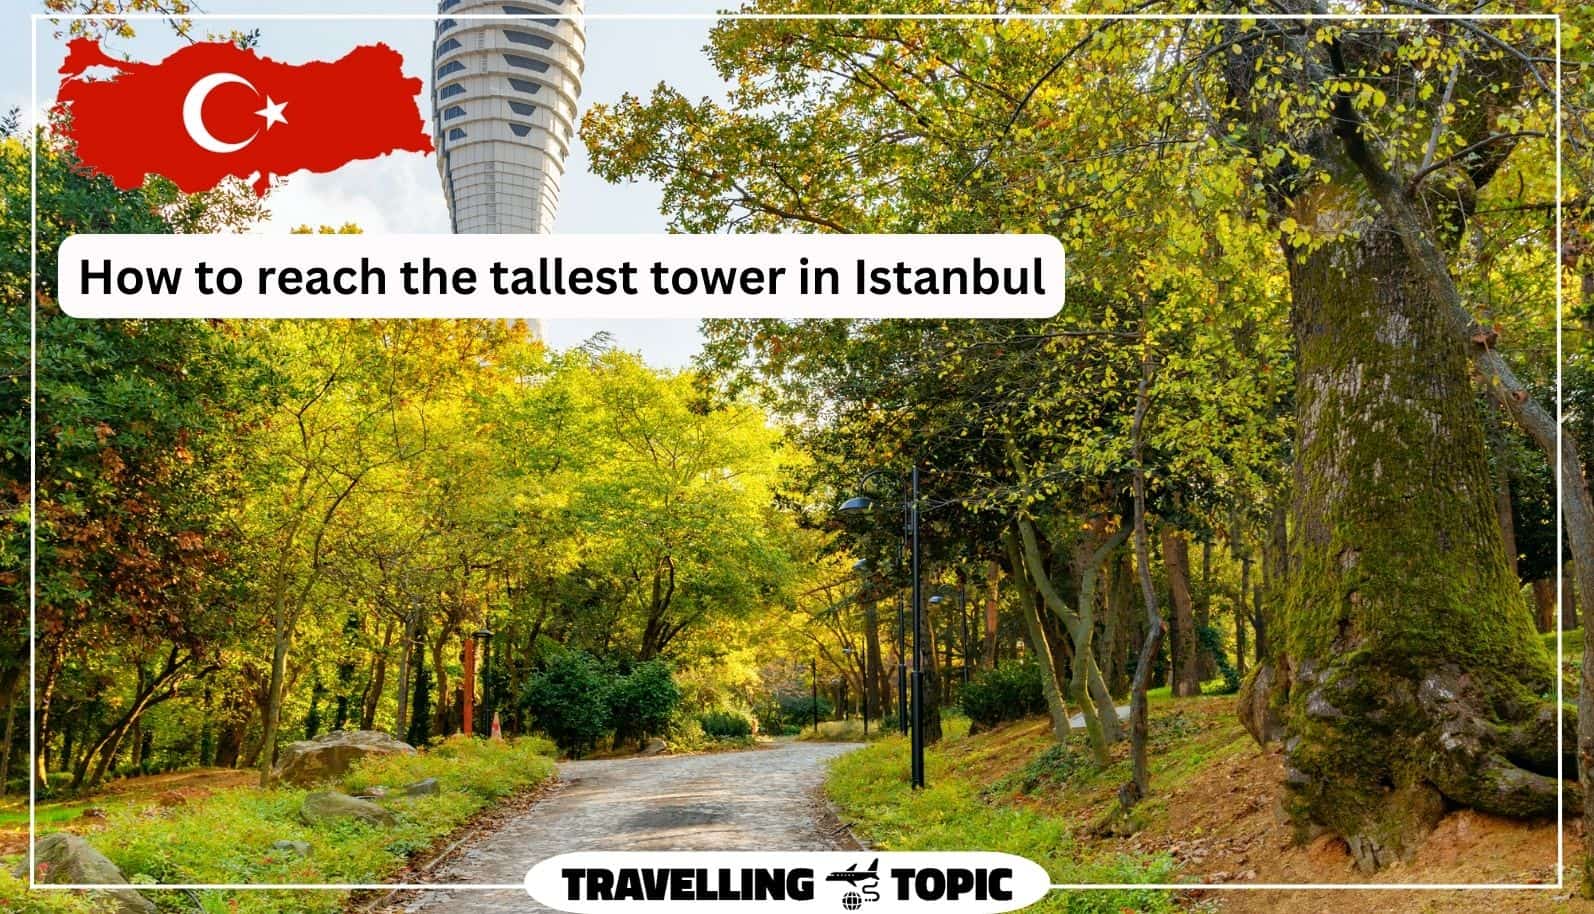 How to reach the tallest tower in Istanbul